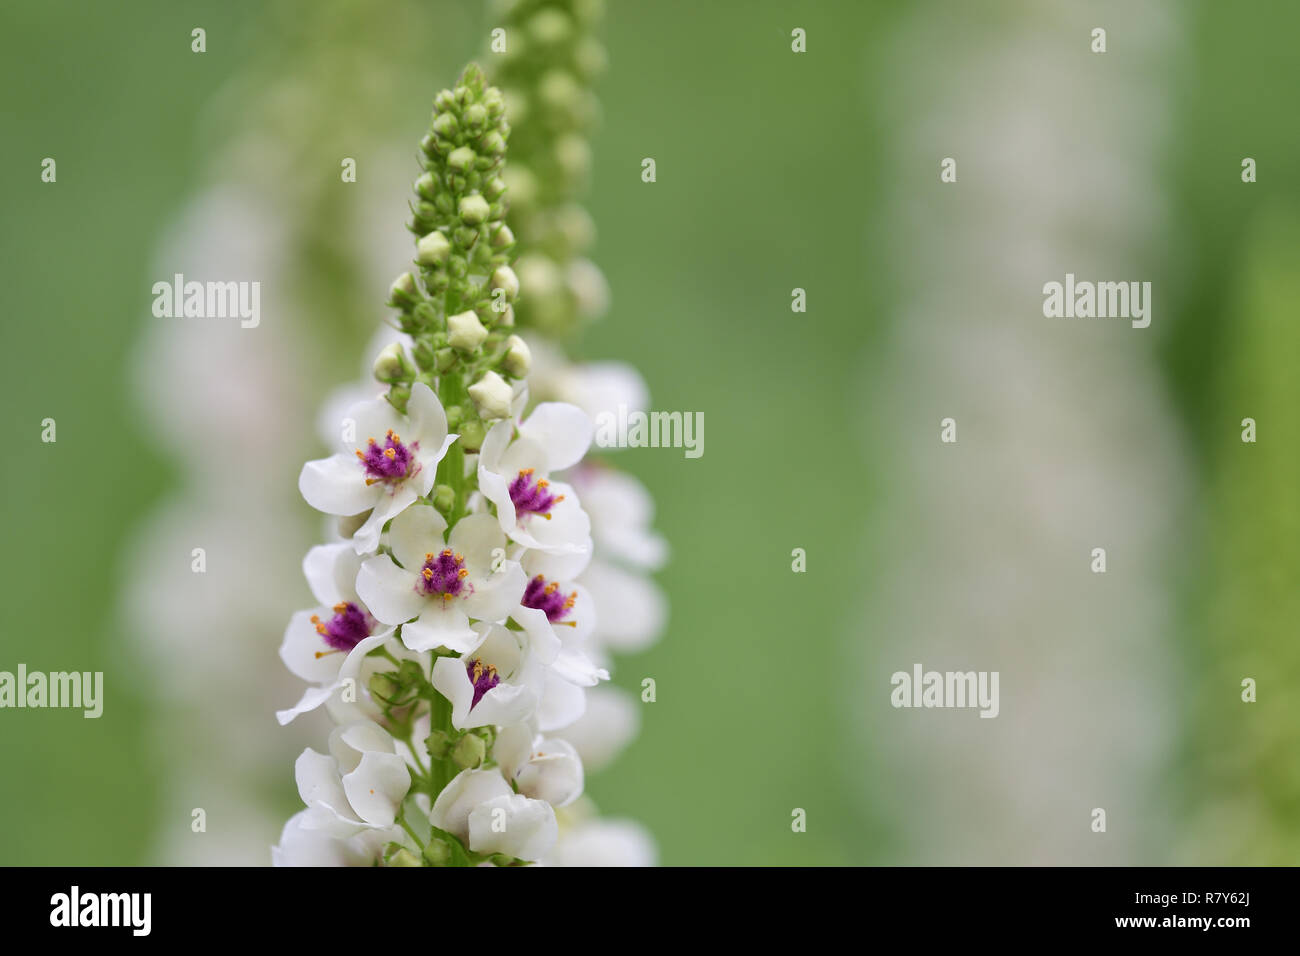 Close up of nettle leaf mullein (Verbascum chaixii) in bloom Stock Photo